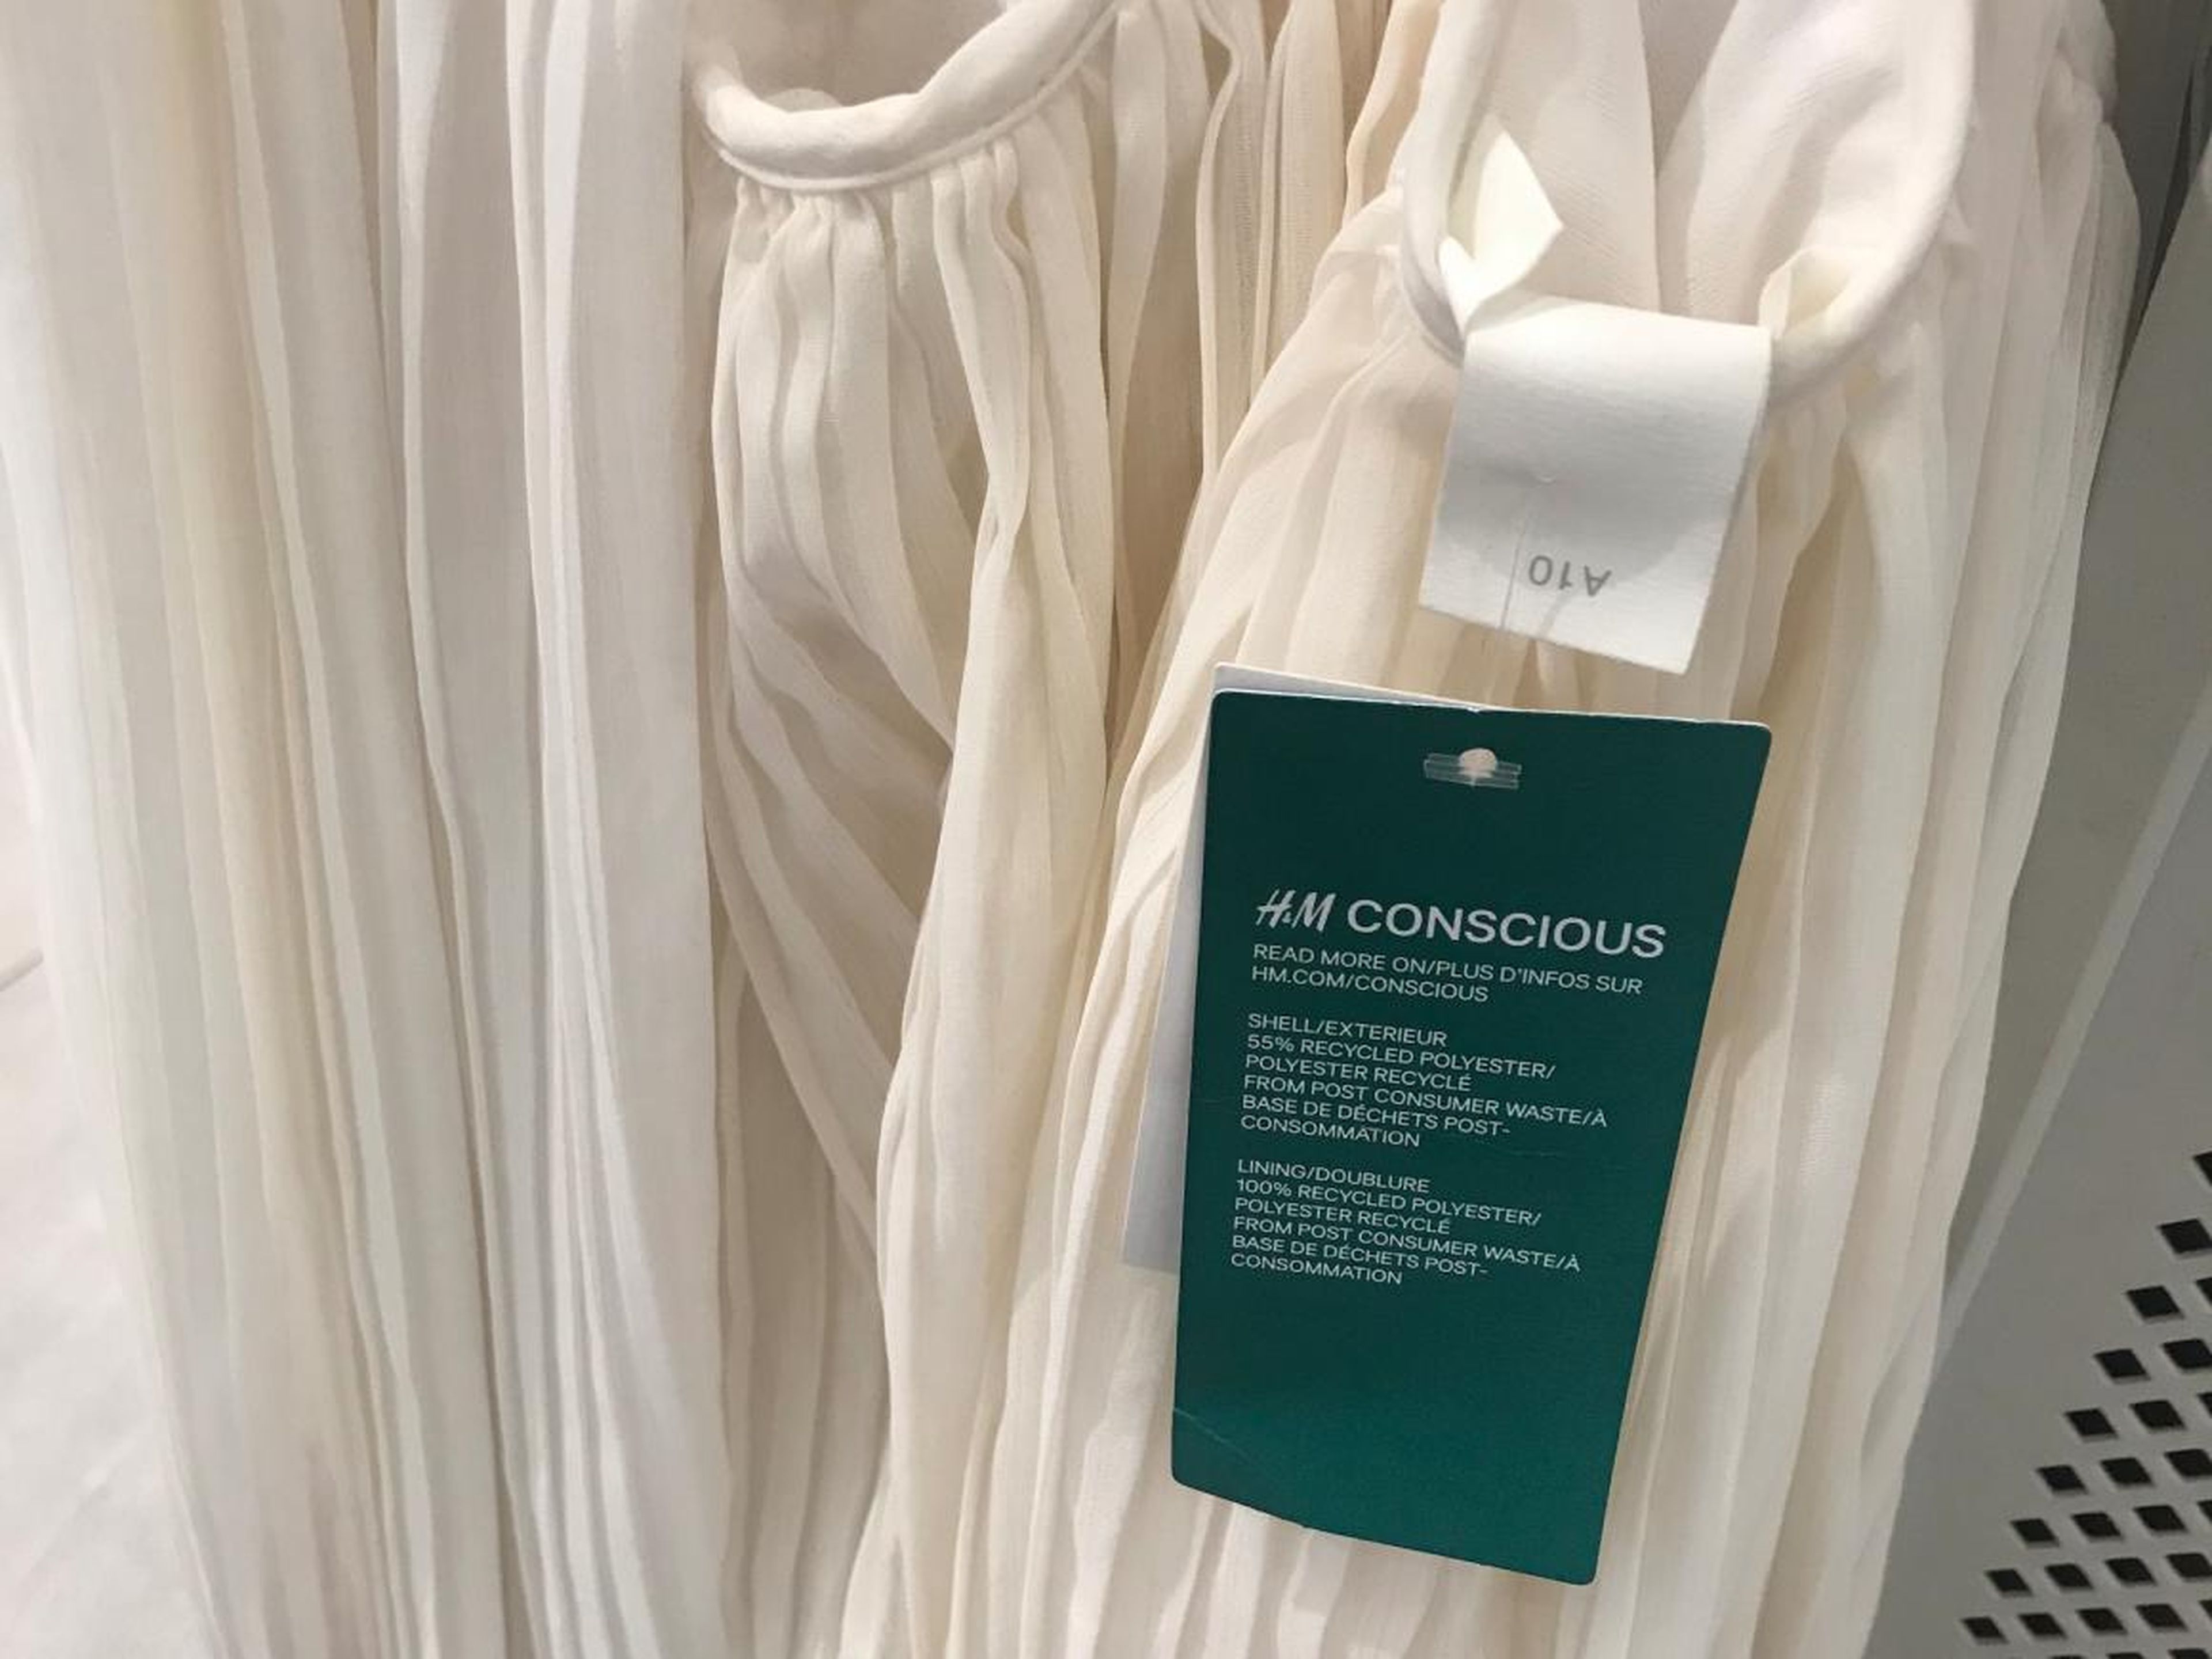 H&M has continued to build out its H&M Conscious line, a collection of eco-friendly and sustainable products made out of recycled materials. Here is an H&M Conscious tag on a dress.